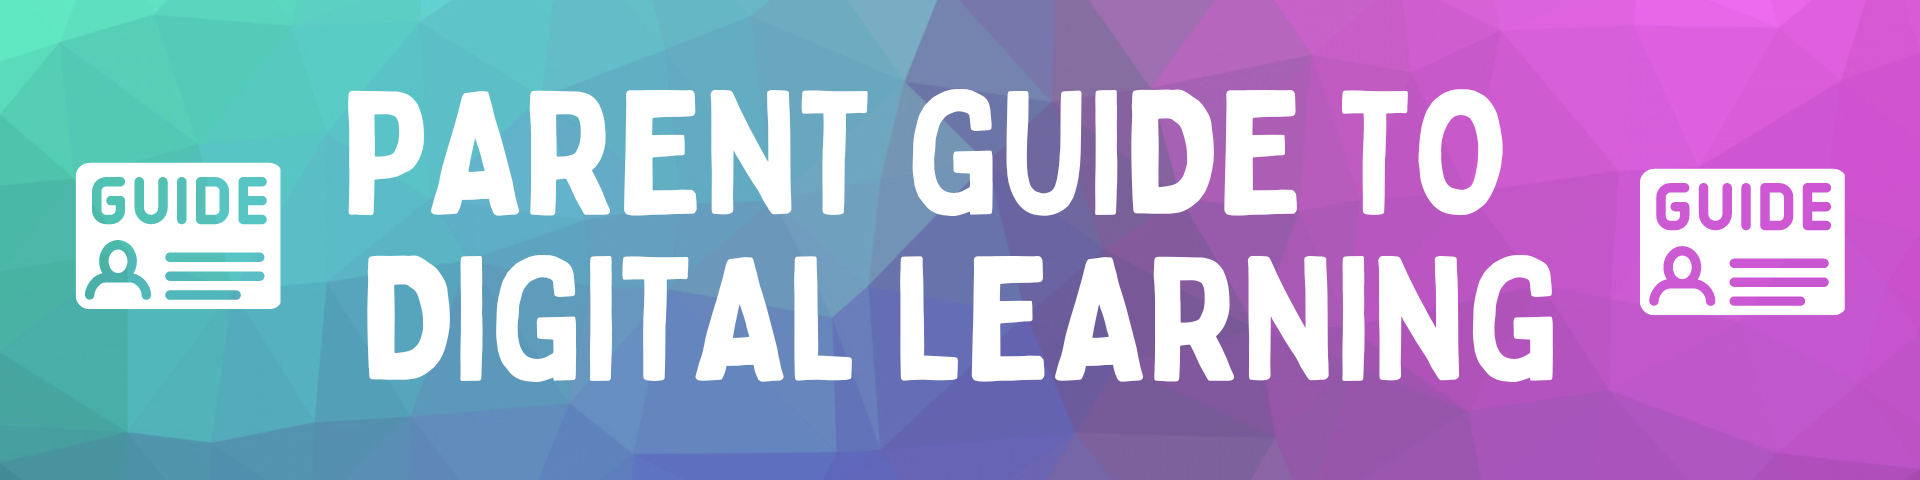 Parent Guide to Digital Learning